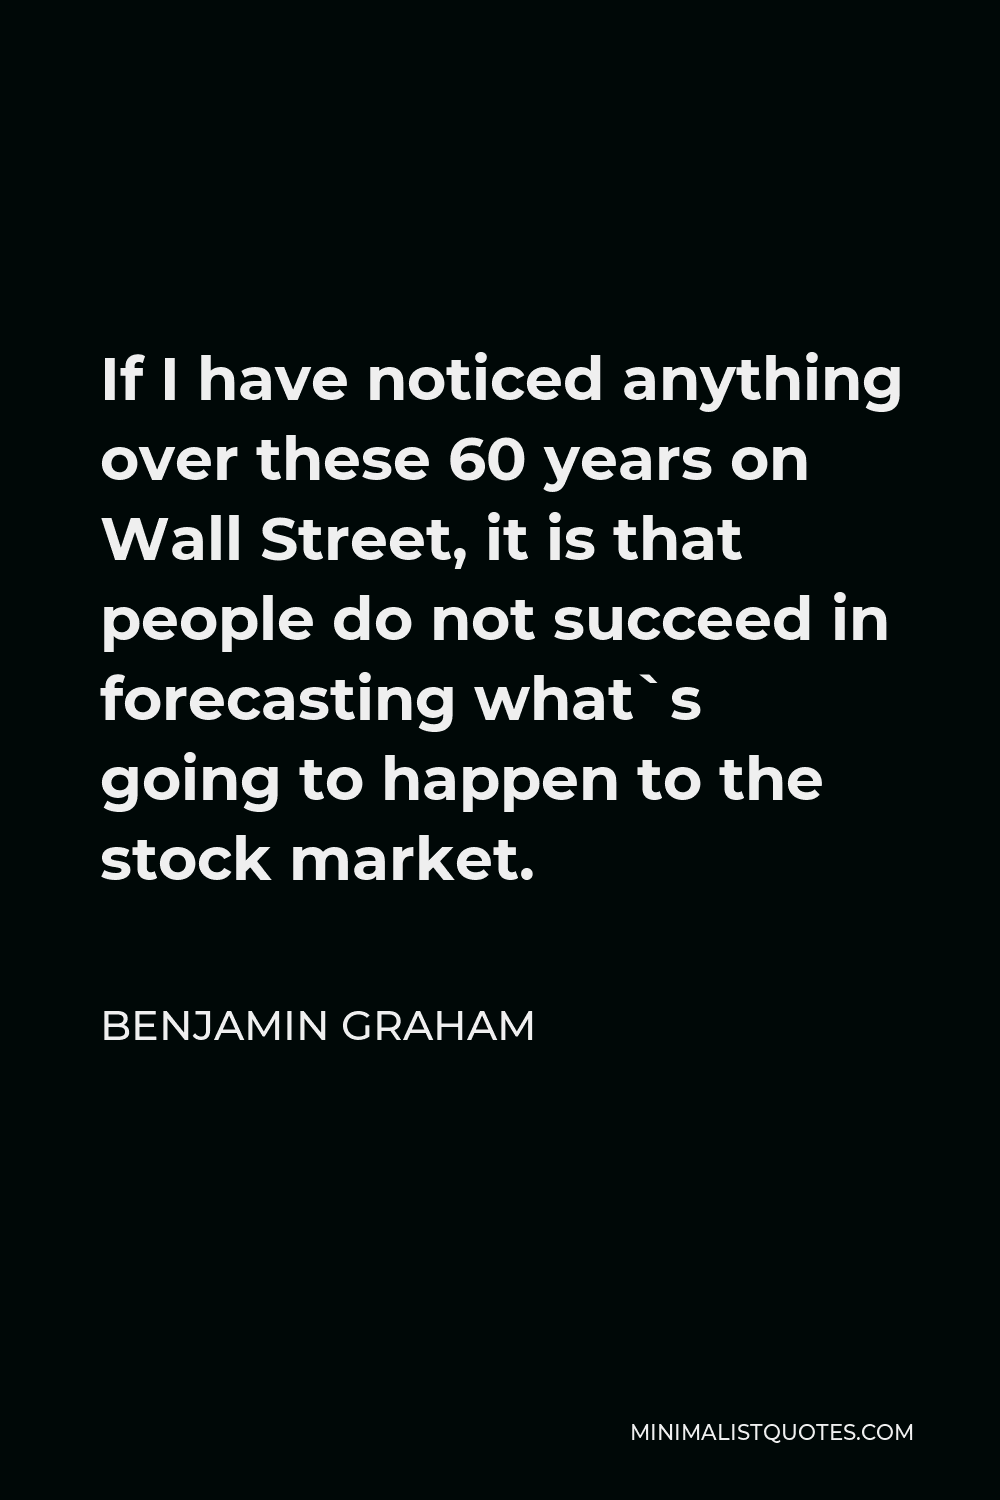 Benjamin Graham Quote - If I have noticed anything over these 60 years on Wall Street, it is that people do not succeed in forecasting what`s going to happen to the stock market.